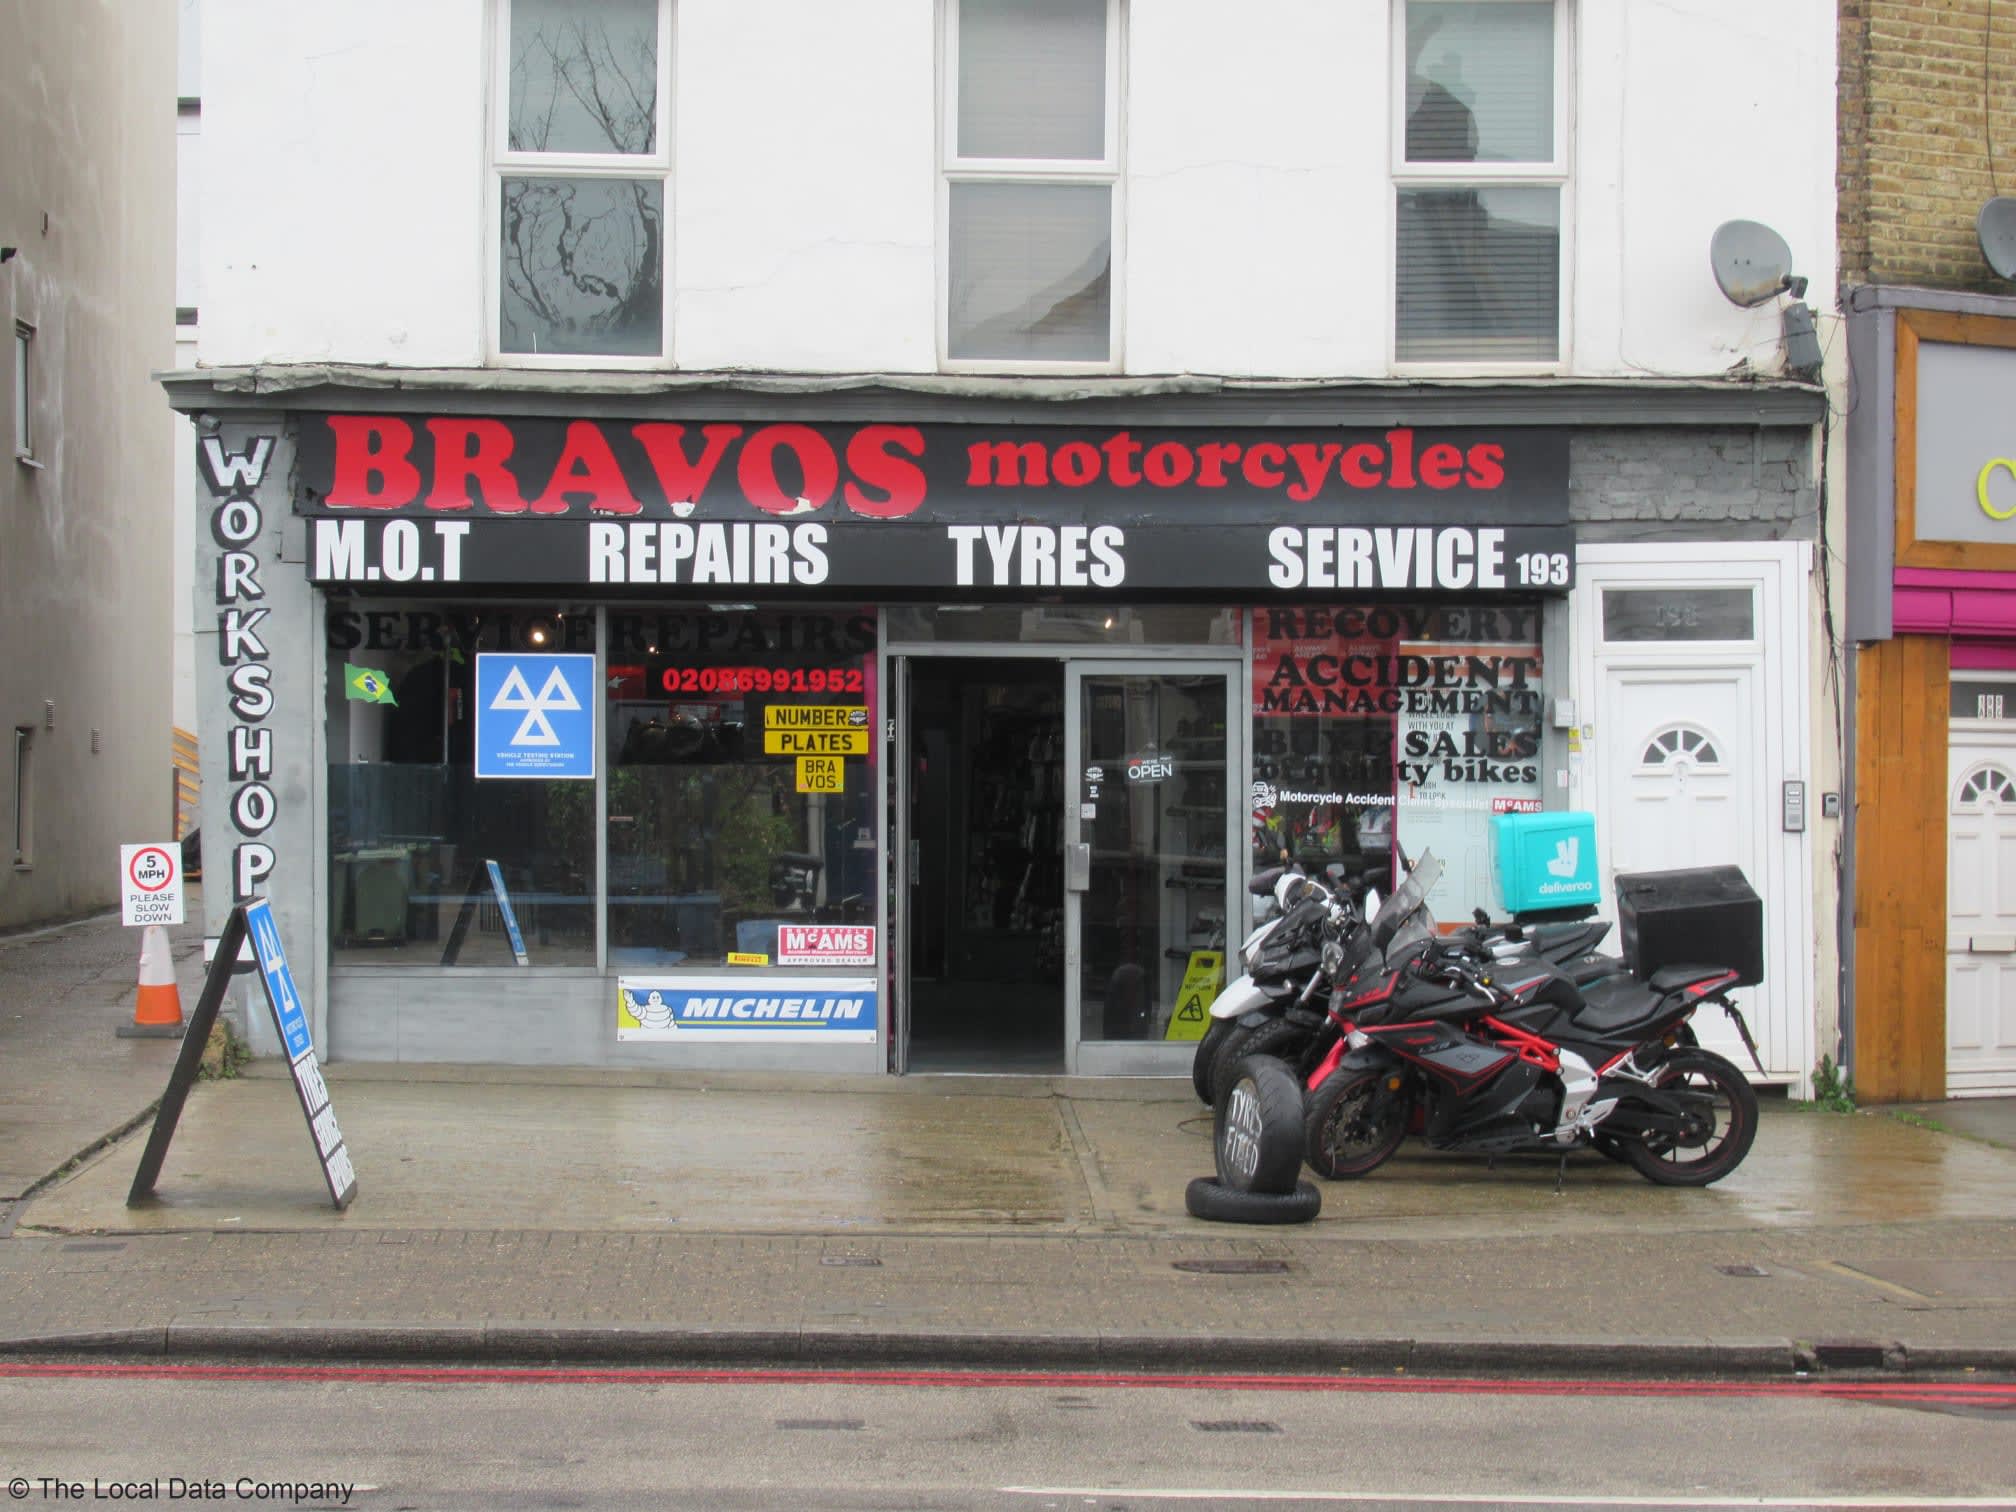 Images Bravos Motorcycles